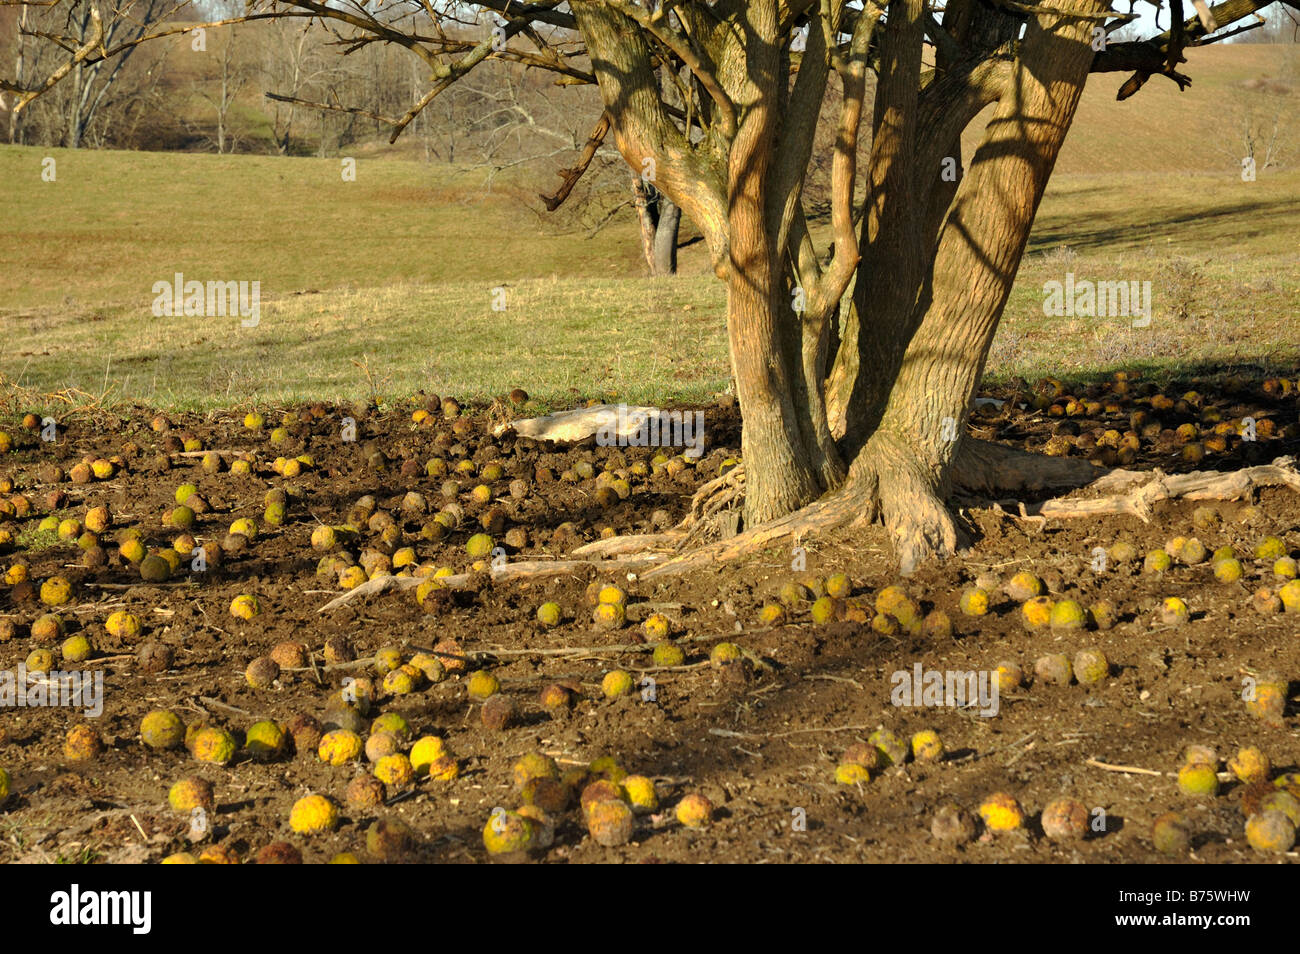 A female Osage Orange or Hedge apple tree in Kentucky with its fruit on the ground beneath Stock Photo